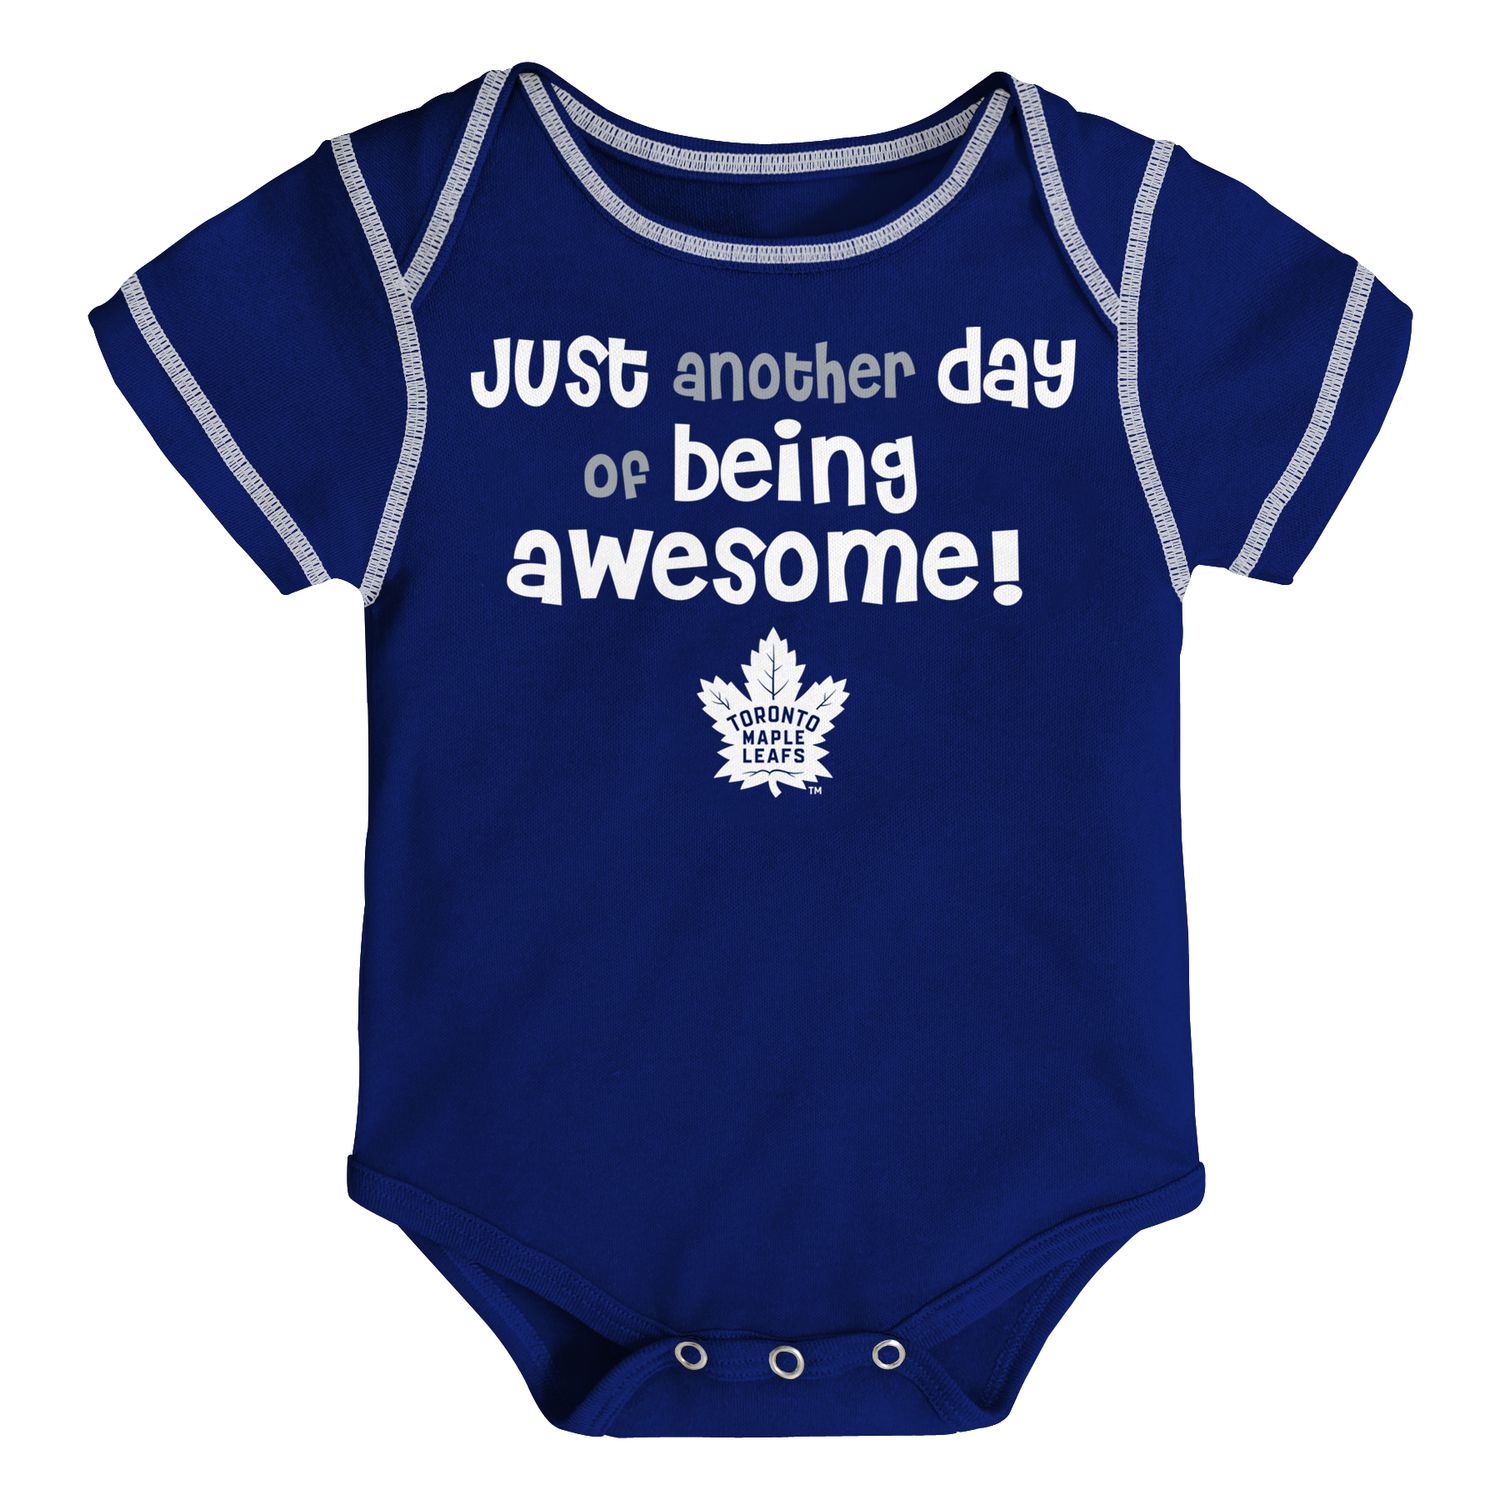 infant maple leafs jersey